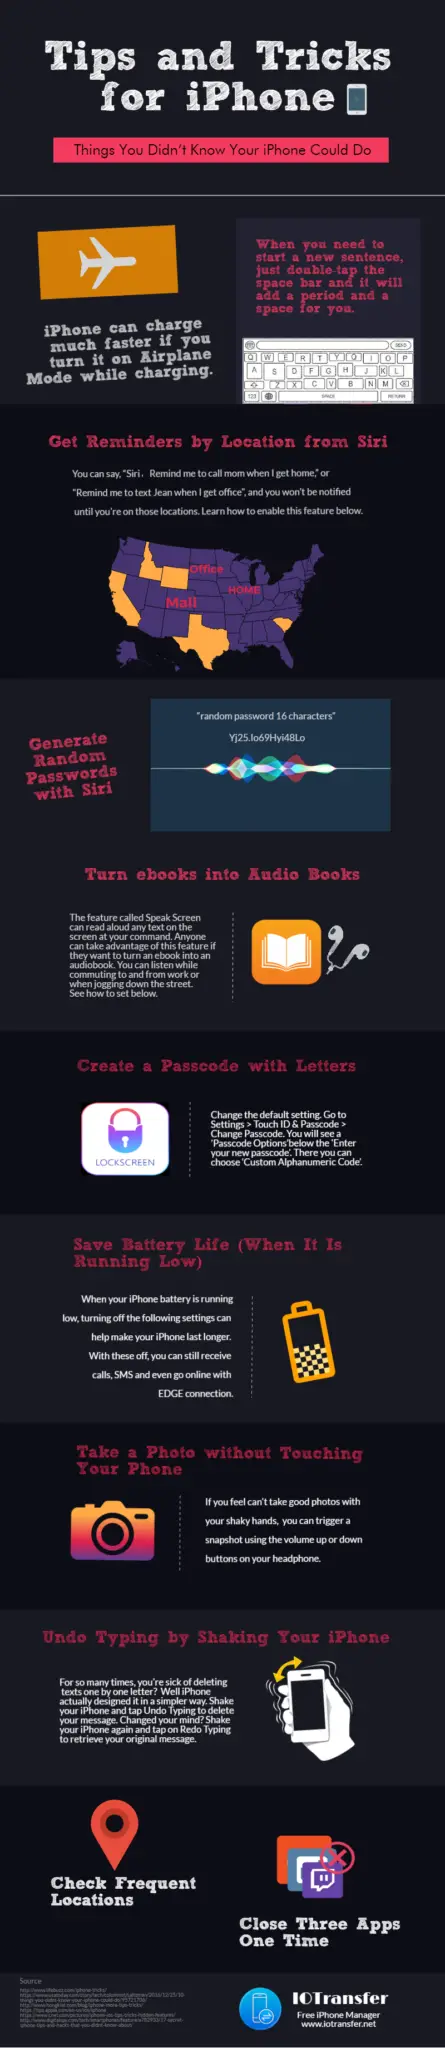 iPhone Tips and Tricks Infographic - Things you might not know about your iPhone 1